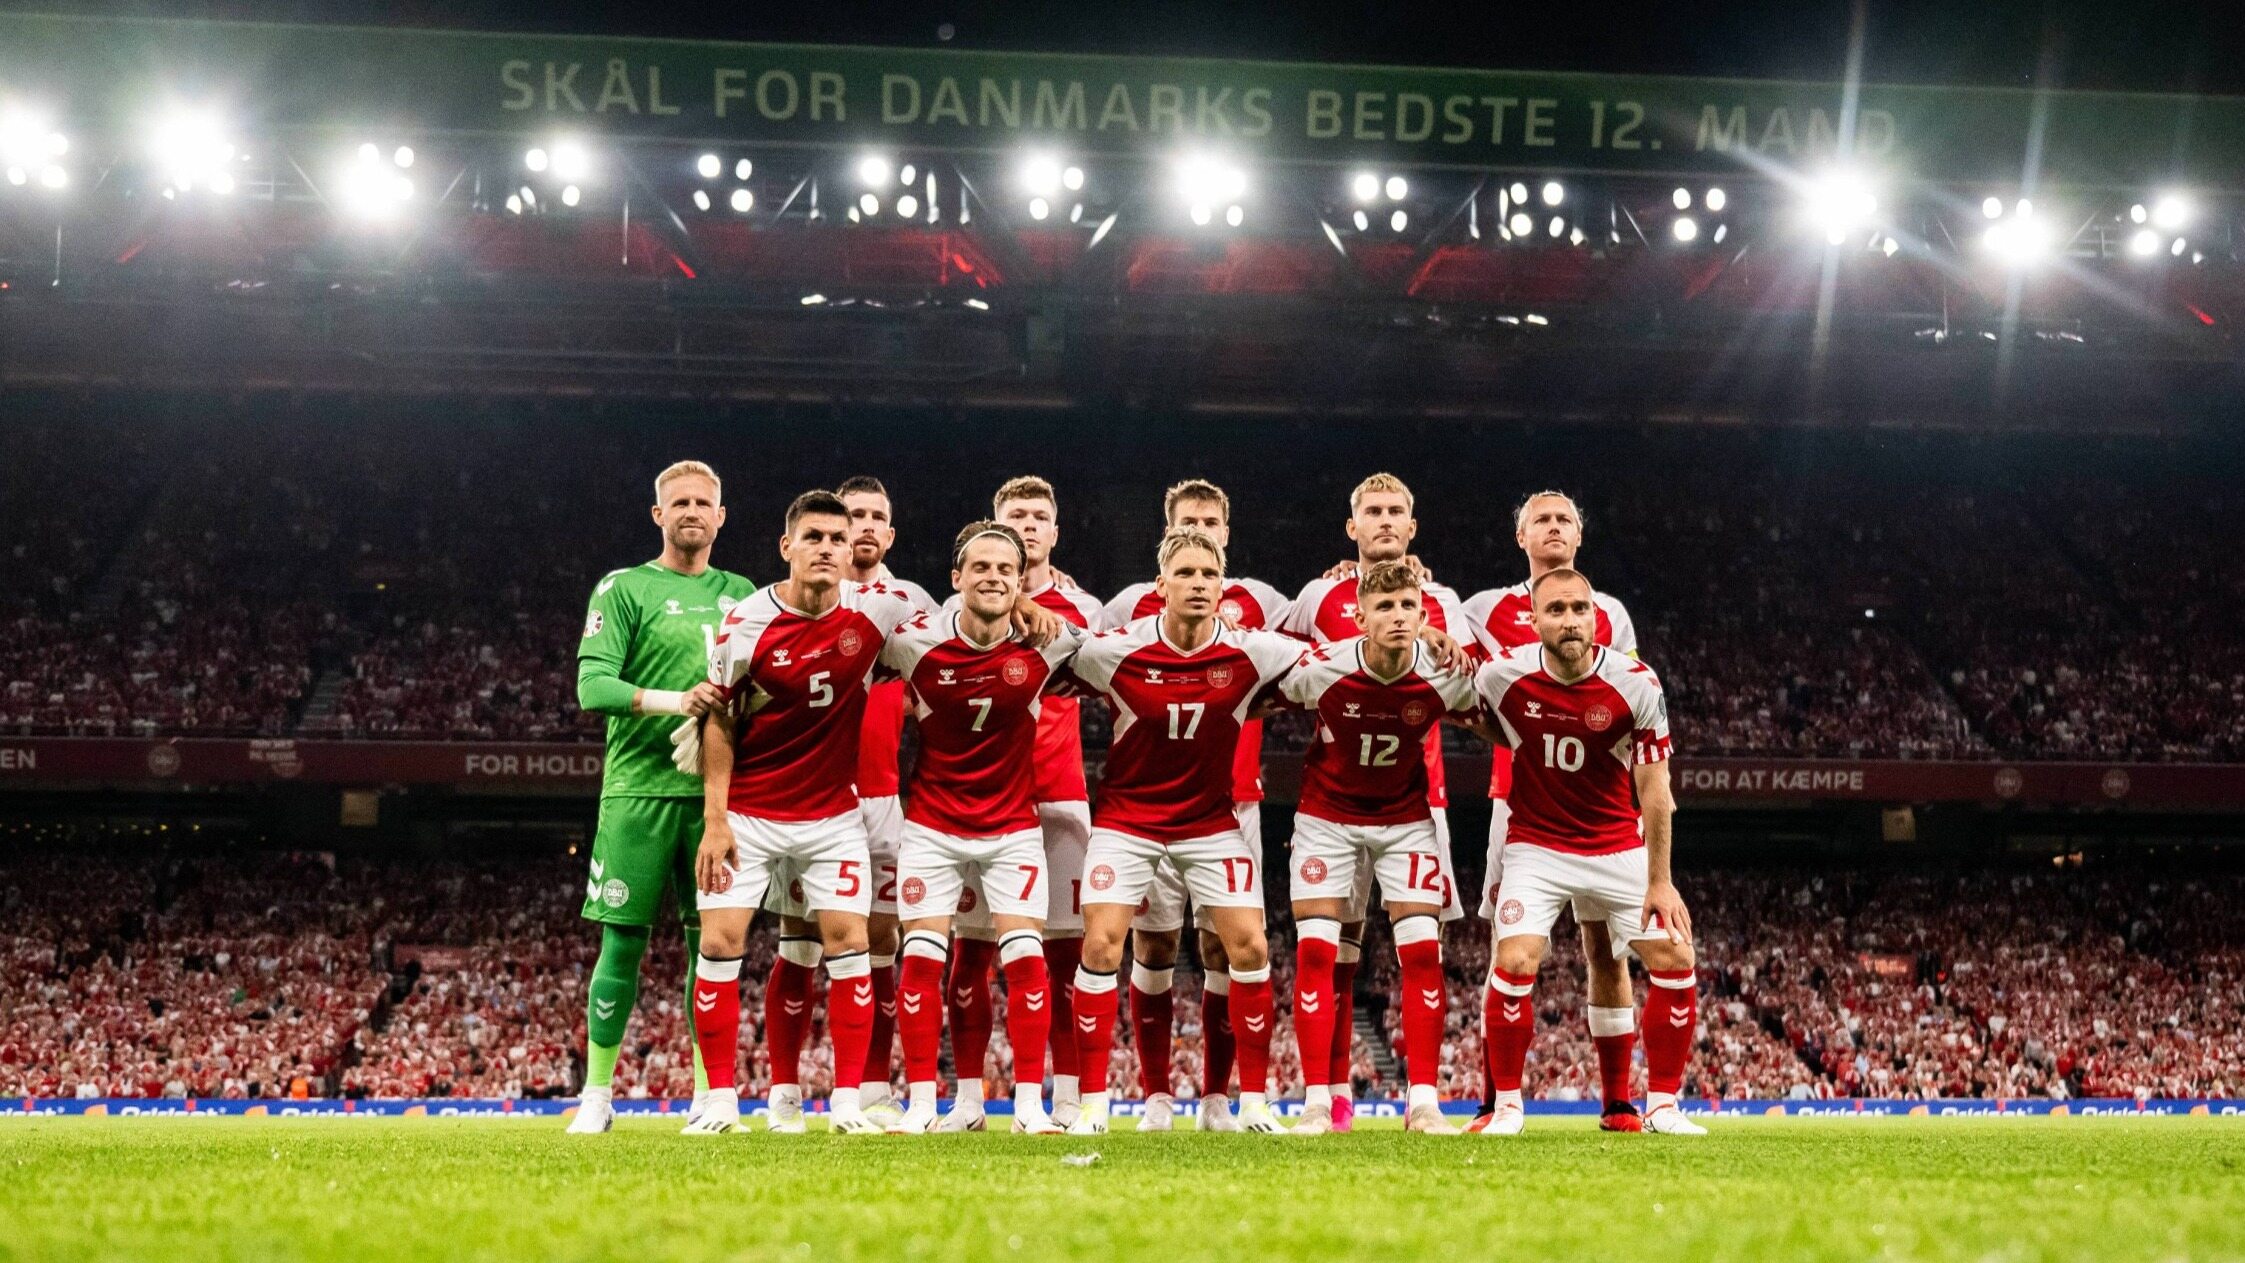 They saved a dying friend and reached the top four.  A great journey for the Danes